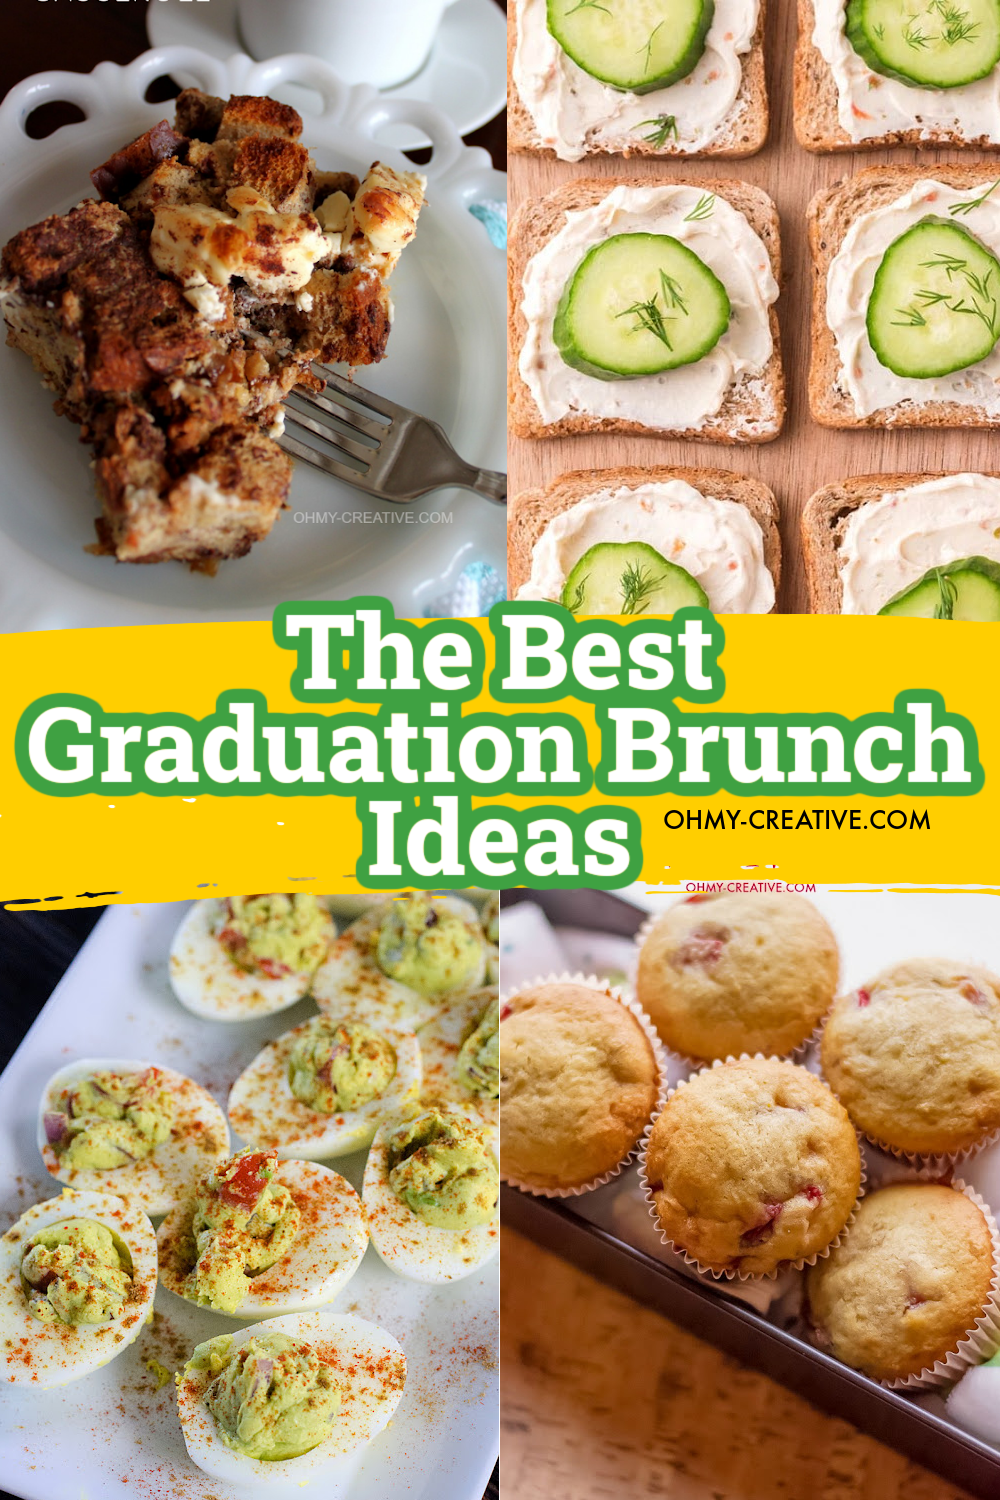 A collage of graduation brunch recipes including french toast casserole, cucumber sandwiches and avocado deviled eggs.